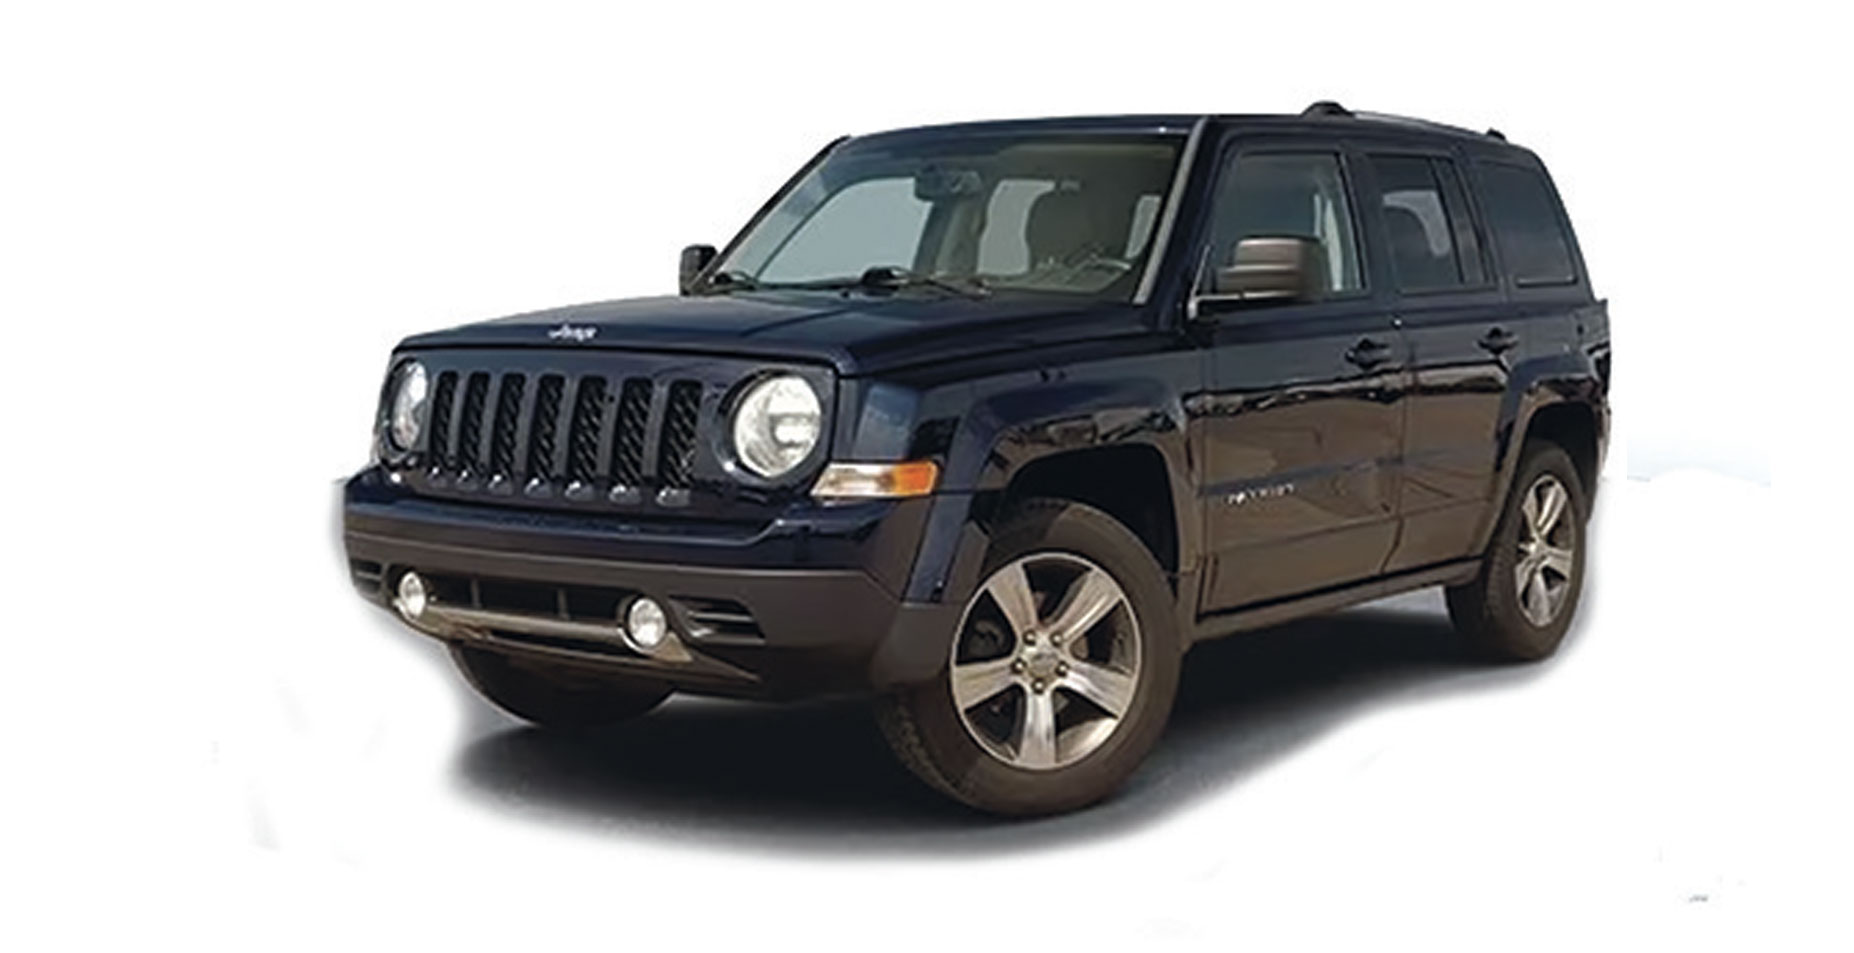 Pre-Owned 2017 JEEP Patriot High Altitude Sale Price $16,000**